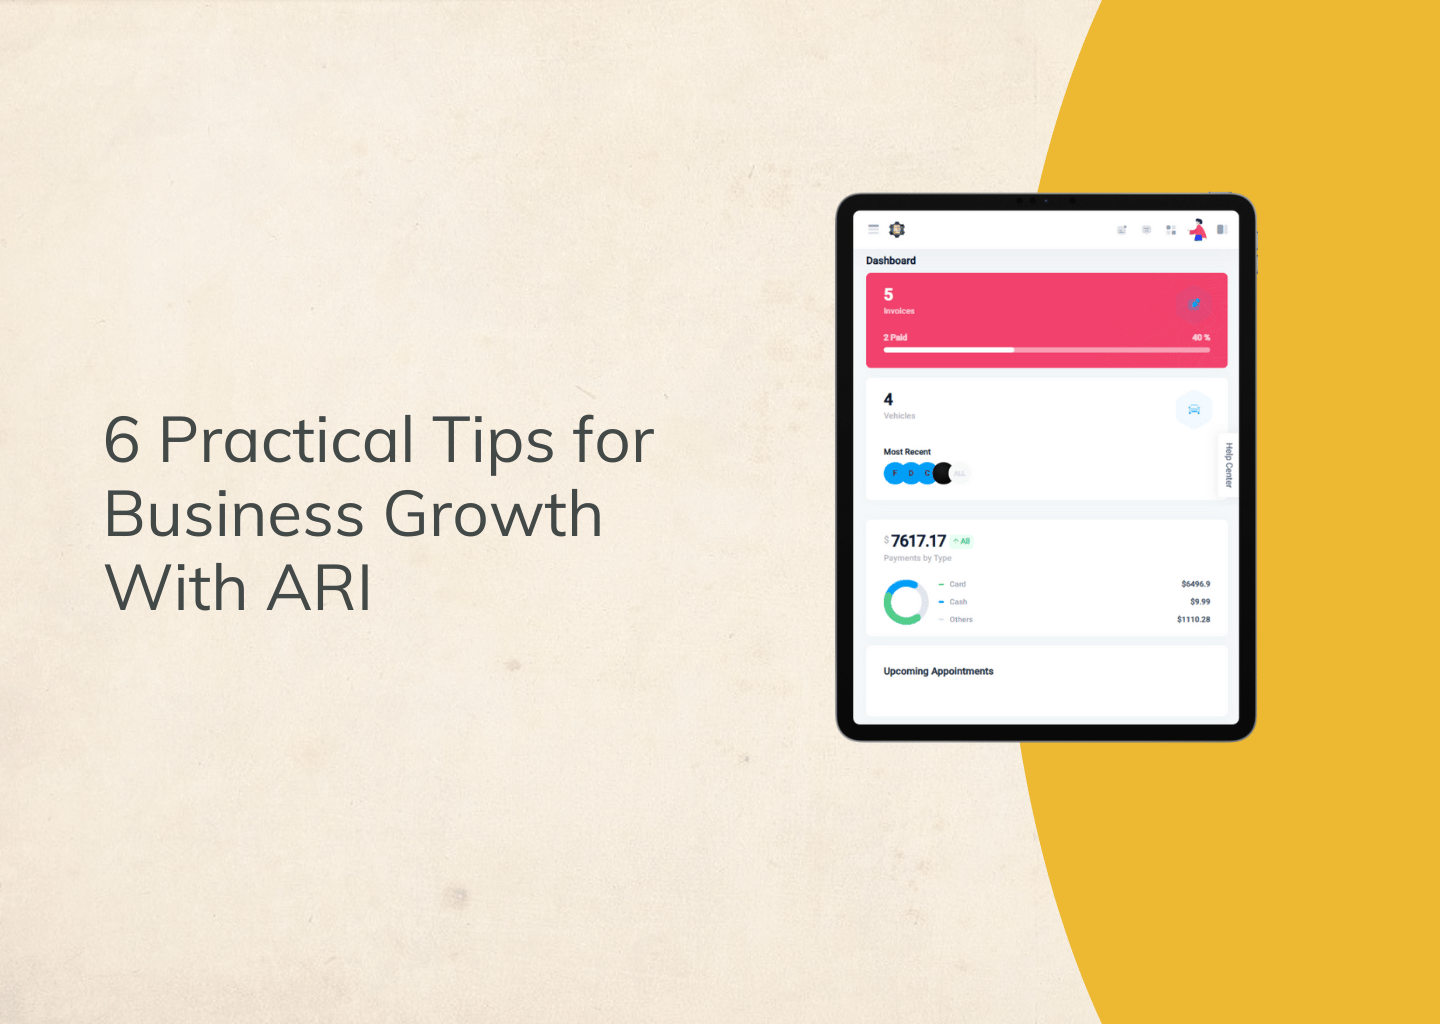 6 Practical Tips for Business Growth in ARI